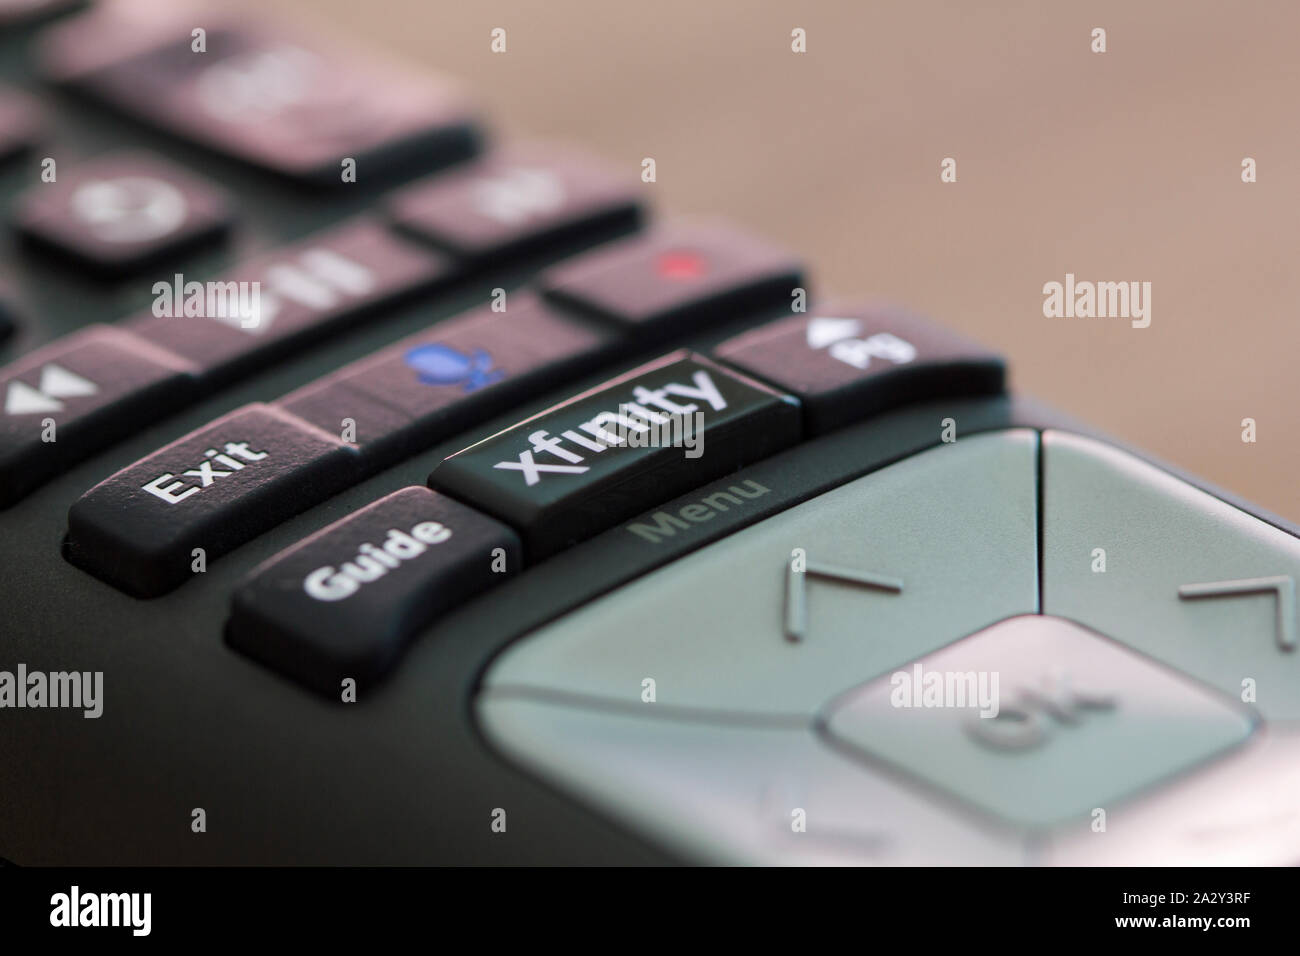 Portland, OR - May 8, 2019: The Xfinity X1 TV remote control with voice commands functionality. Xfinity is a trade name of Comcast. Stock Photo